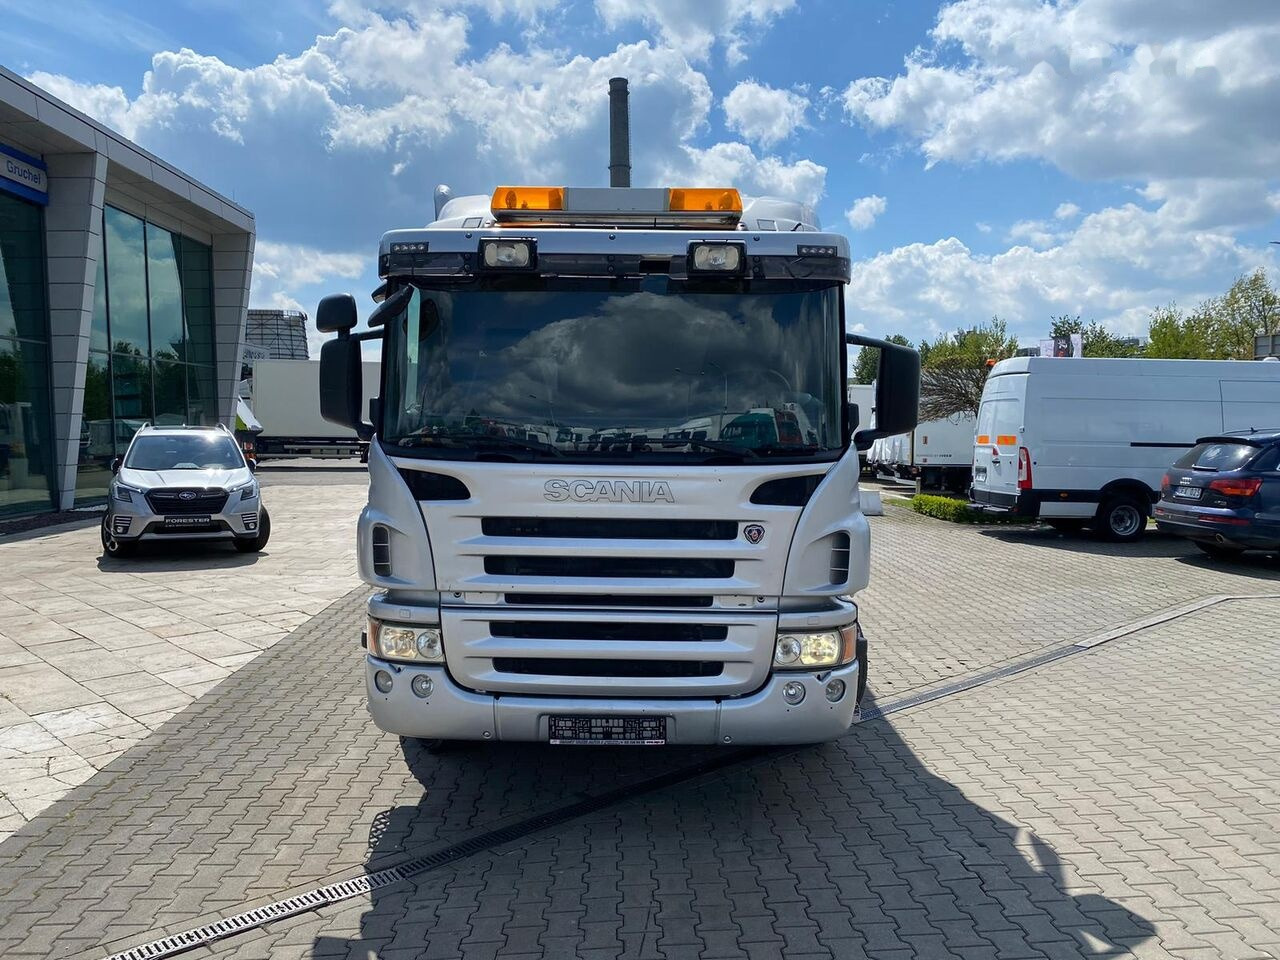 Scania P230DB / JOAB ANACONDA TWIN 13.3m3 / 1 OWNER / FULL SERVICED leasing Scania P230DB / JOAB ANACONDA TWIN 13.3m3 / 1 OWNER / FULL SERVICED: picture 3